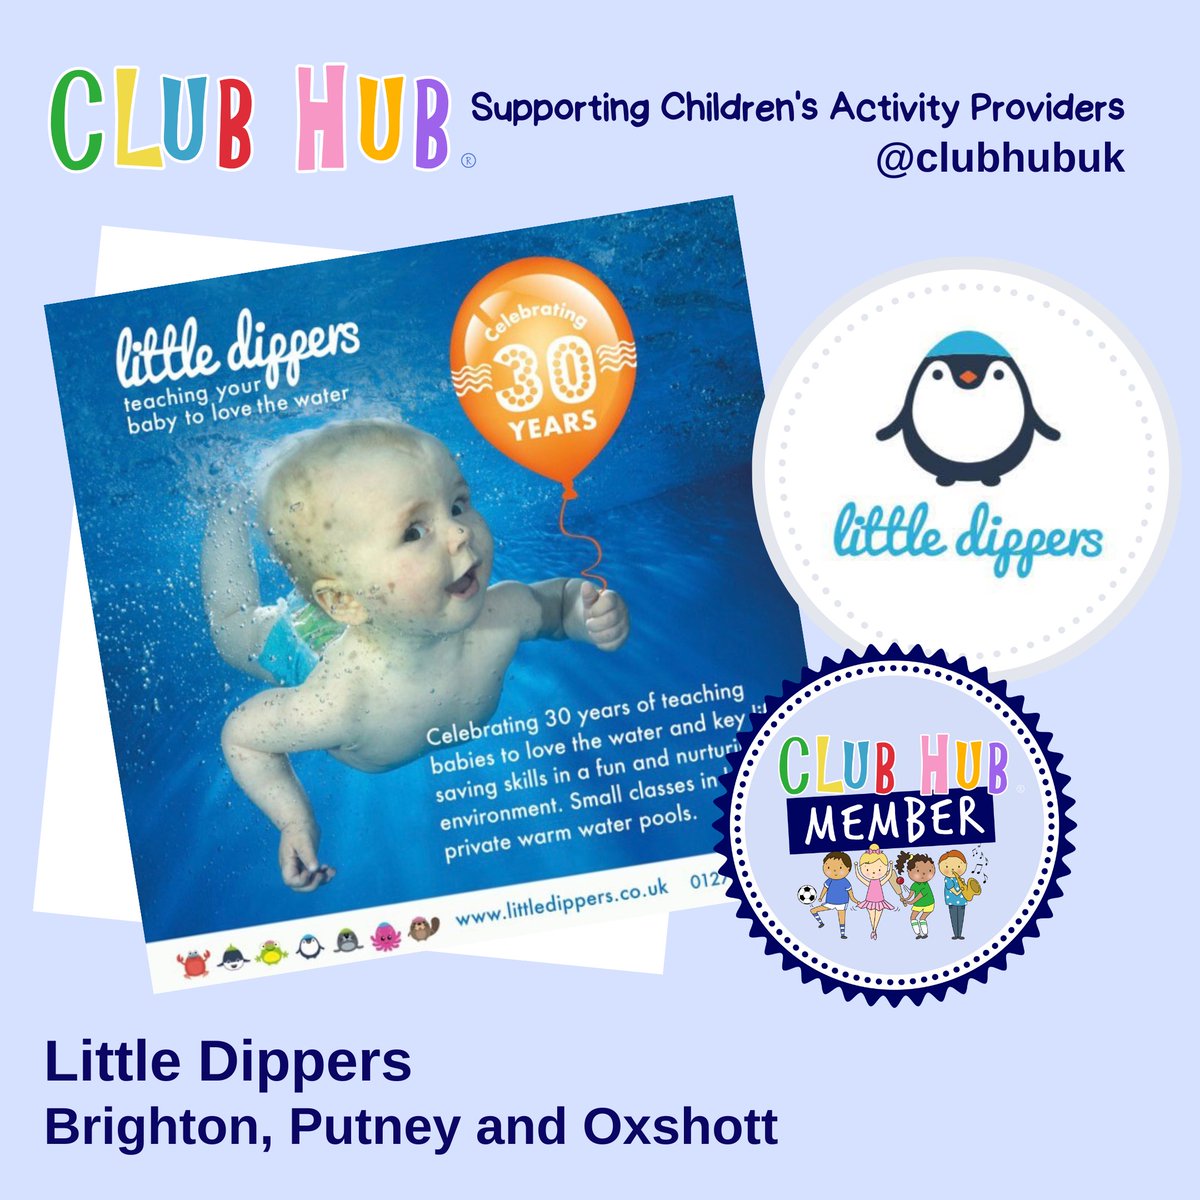 Did you know that @l_dippers provide warm water pools across Brighton, Putney and Oxshott?
Contact them at info@littledippers.co.uk for more details.

#clubhubmember #babyswim #littledippers #swimminglessons #brighton #putney #oxshott #brightonmums #putneymums #babyswimming